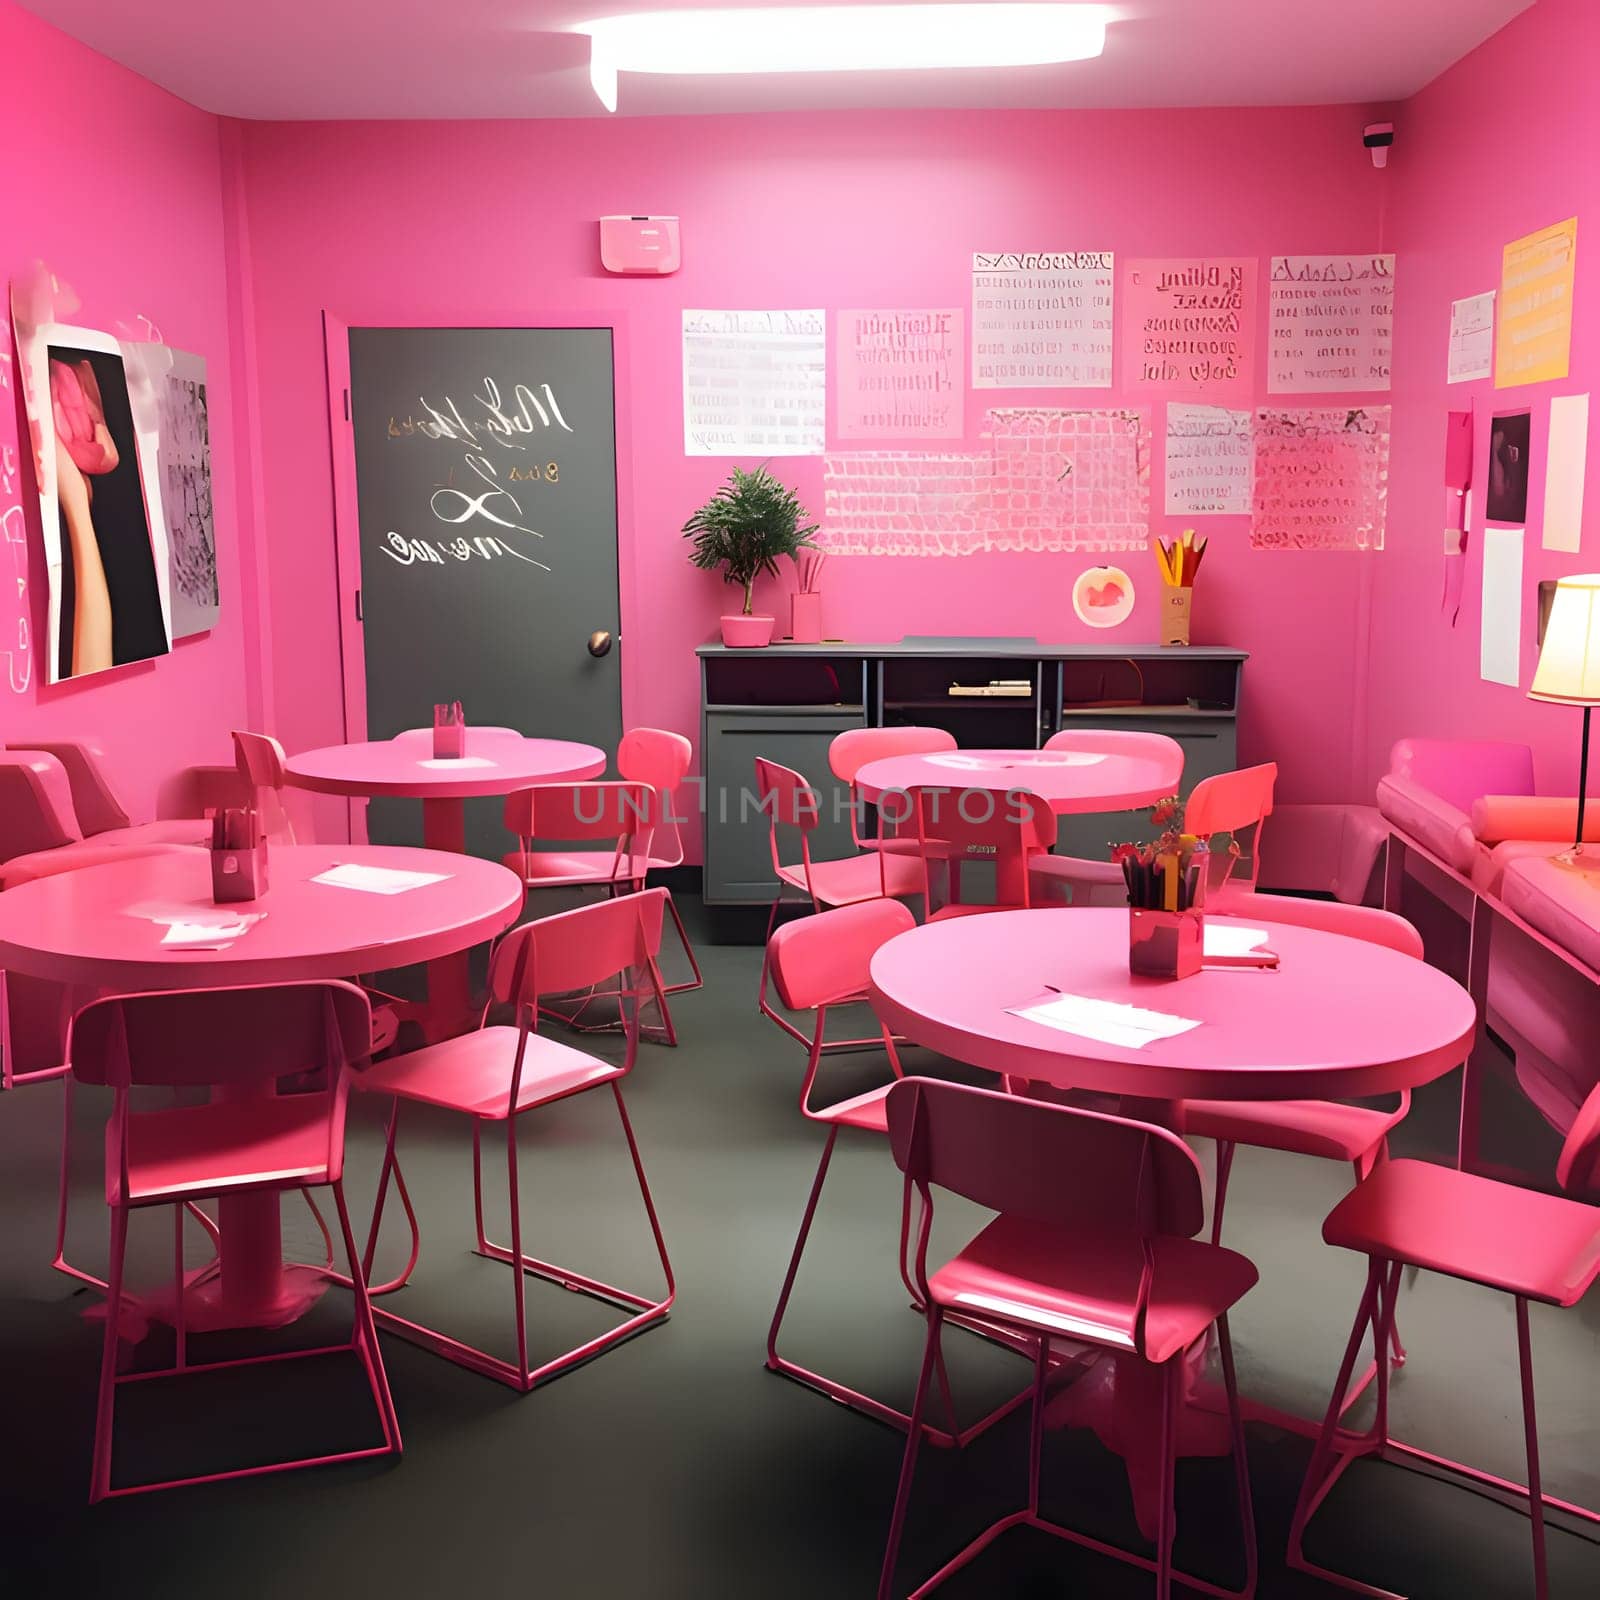 The pink Barbie room is adorned with charming chairs, delicate windows, elegant tables, and adorable cabinets, creating a perfect setting for imaginative play and fun.